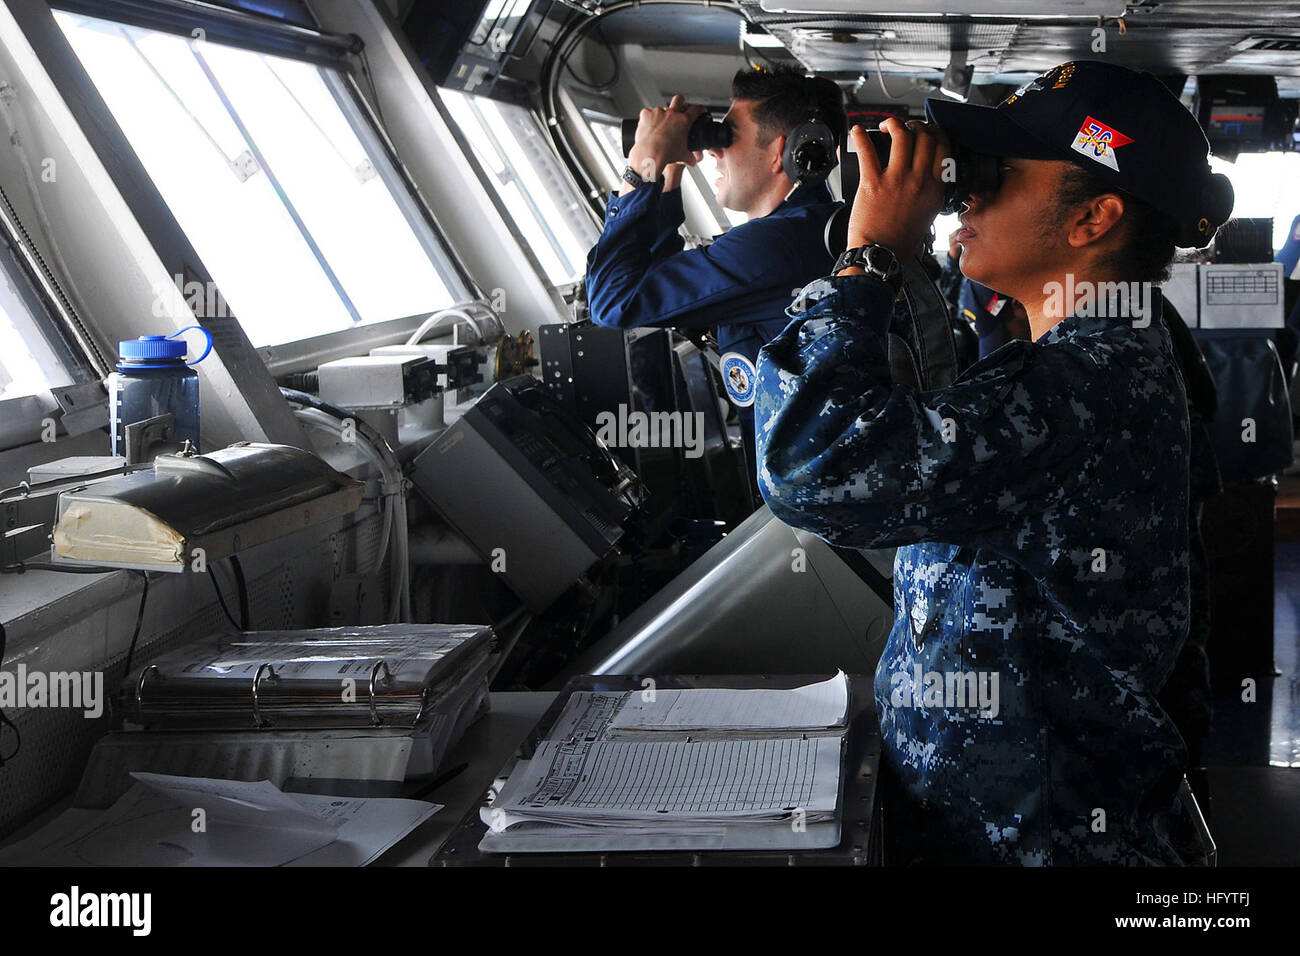 110531-N-EE987-006 ARABIAN GULF (May 31, 2011) Ensign Claudia Garcasrios, from Cordoba, Columbia, and Operations Specialist Seaman David Gomez, from San Diego, scan for surface contacts on the bridge of the aircraft carrier USS Ronald Reagan (CVN 76). Ronald Reagan and Carrier Air Wing (CVW) 14 are deployed to the U.S. 5th Fleet area of responsibility and are conducting close-air support missions as part of Operations Enduring Freedom and New Dawn. (U.S. Navy photo by Mass Communication Specialist 3rd Class Shawn J. Stewart/Released) US Navy 110531-N-EE987-006 Ensign Claudia Garcasrios and Ope Stock Photo